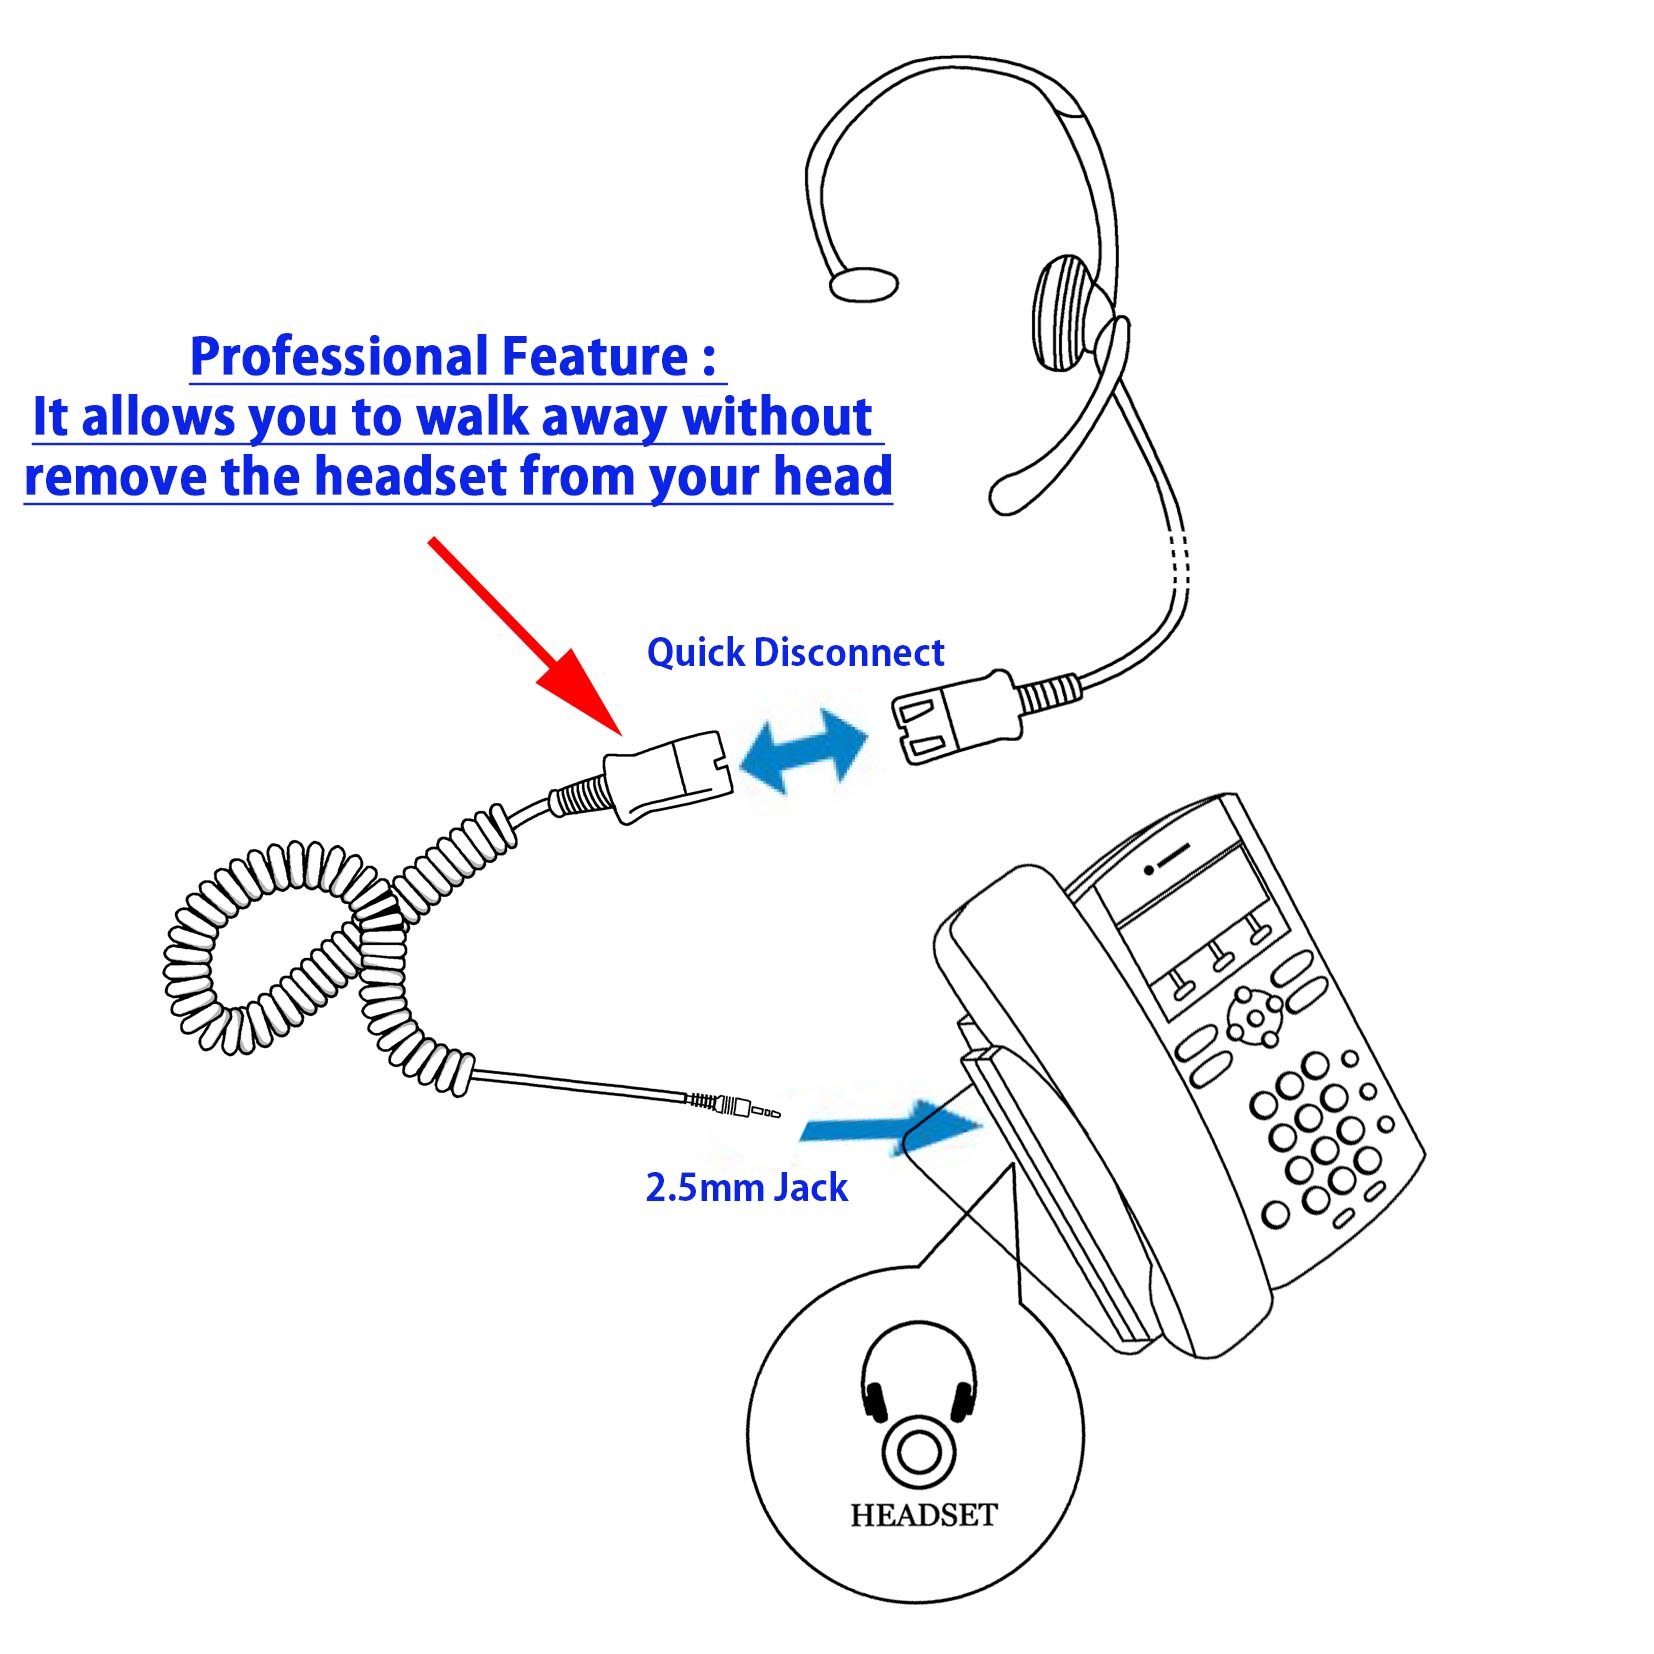 2.5mm Monaural Headset + 2.5 mm Headset Plug Combo for Desk Phone as Office Headset - image 2 of 7